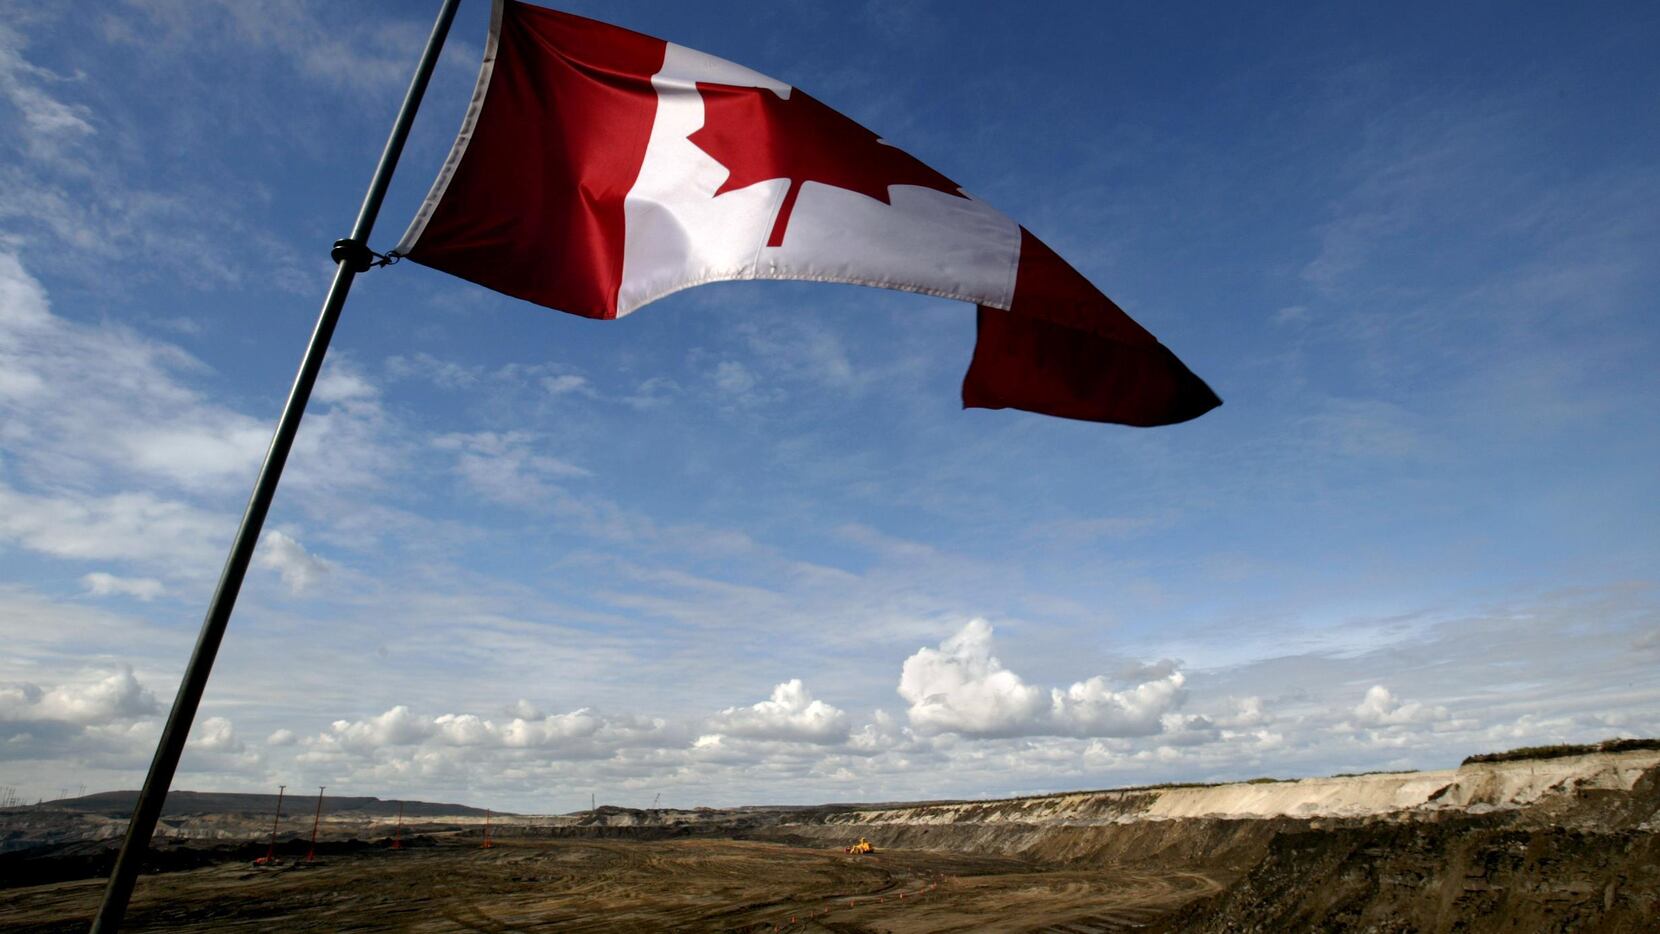 A Canadian flag waves over Alberta.